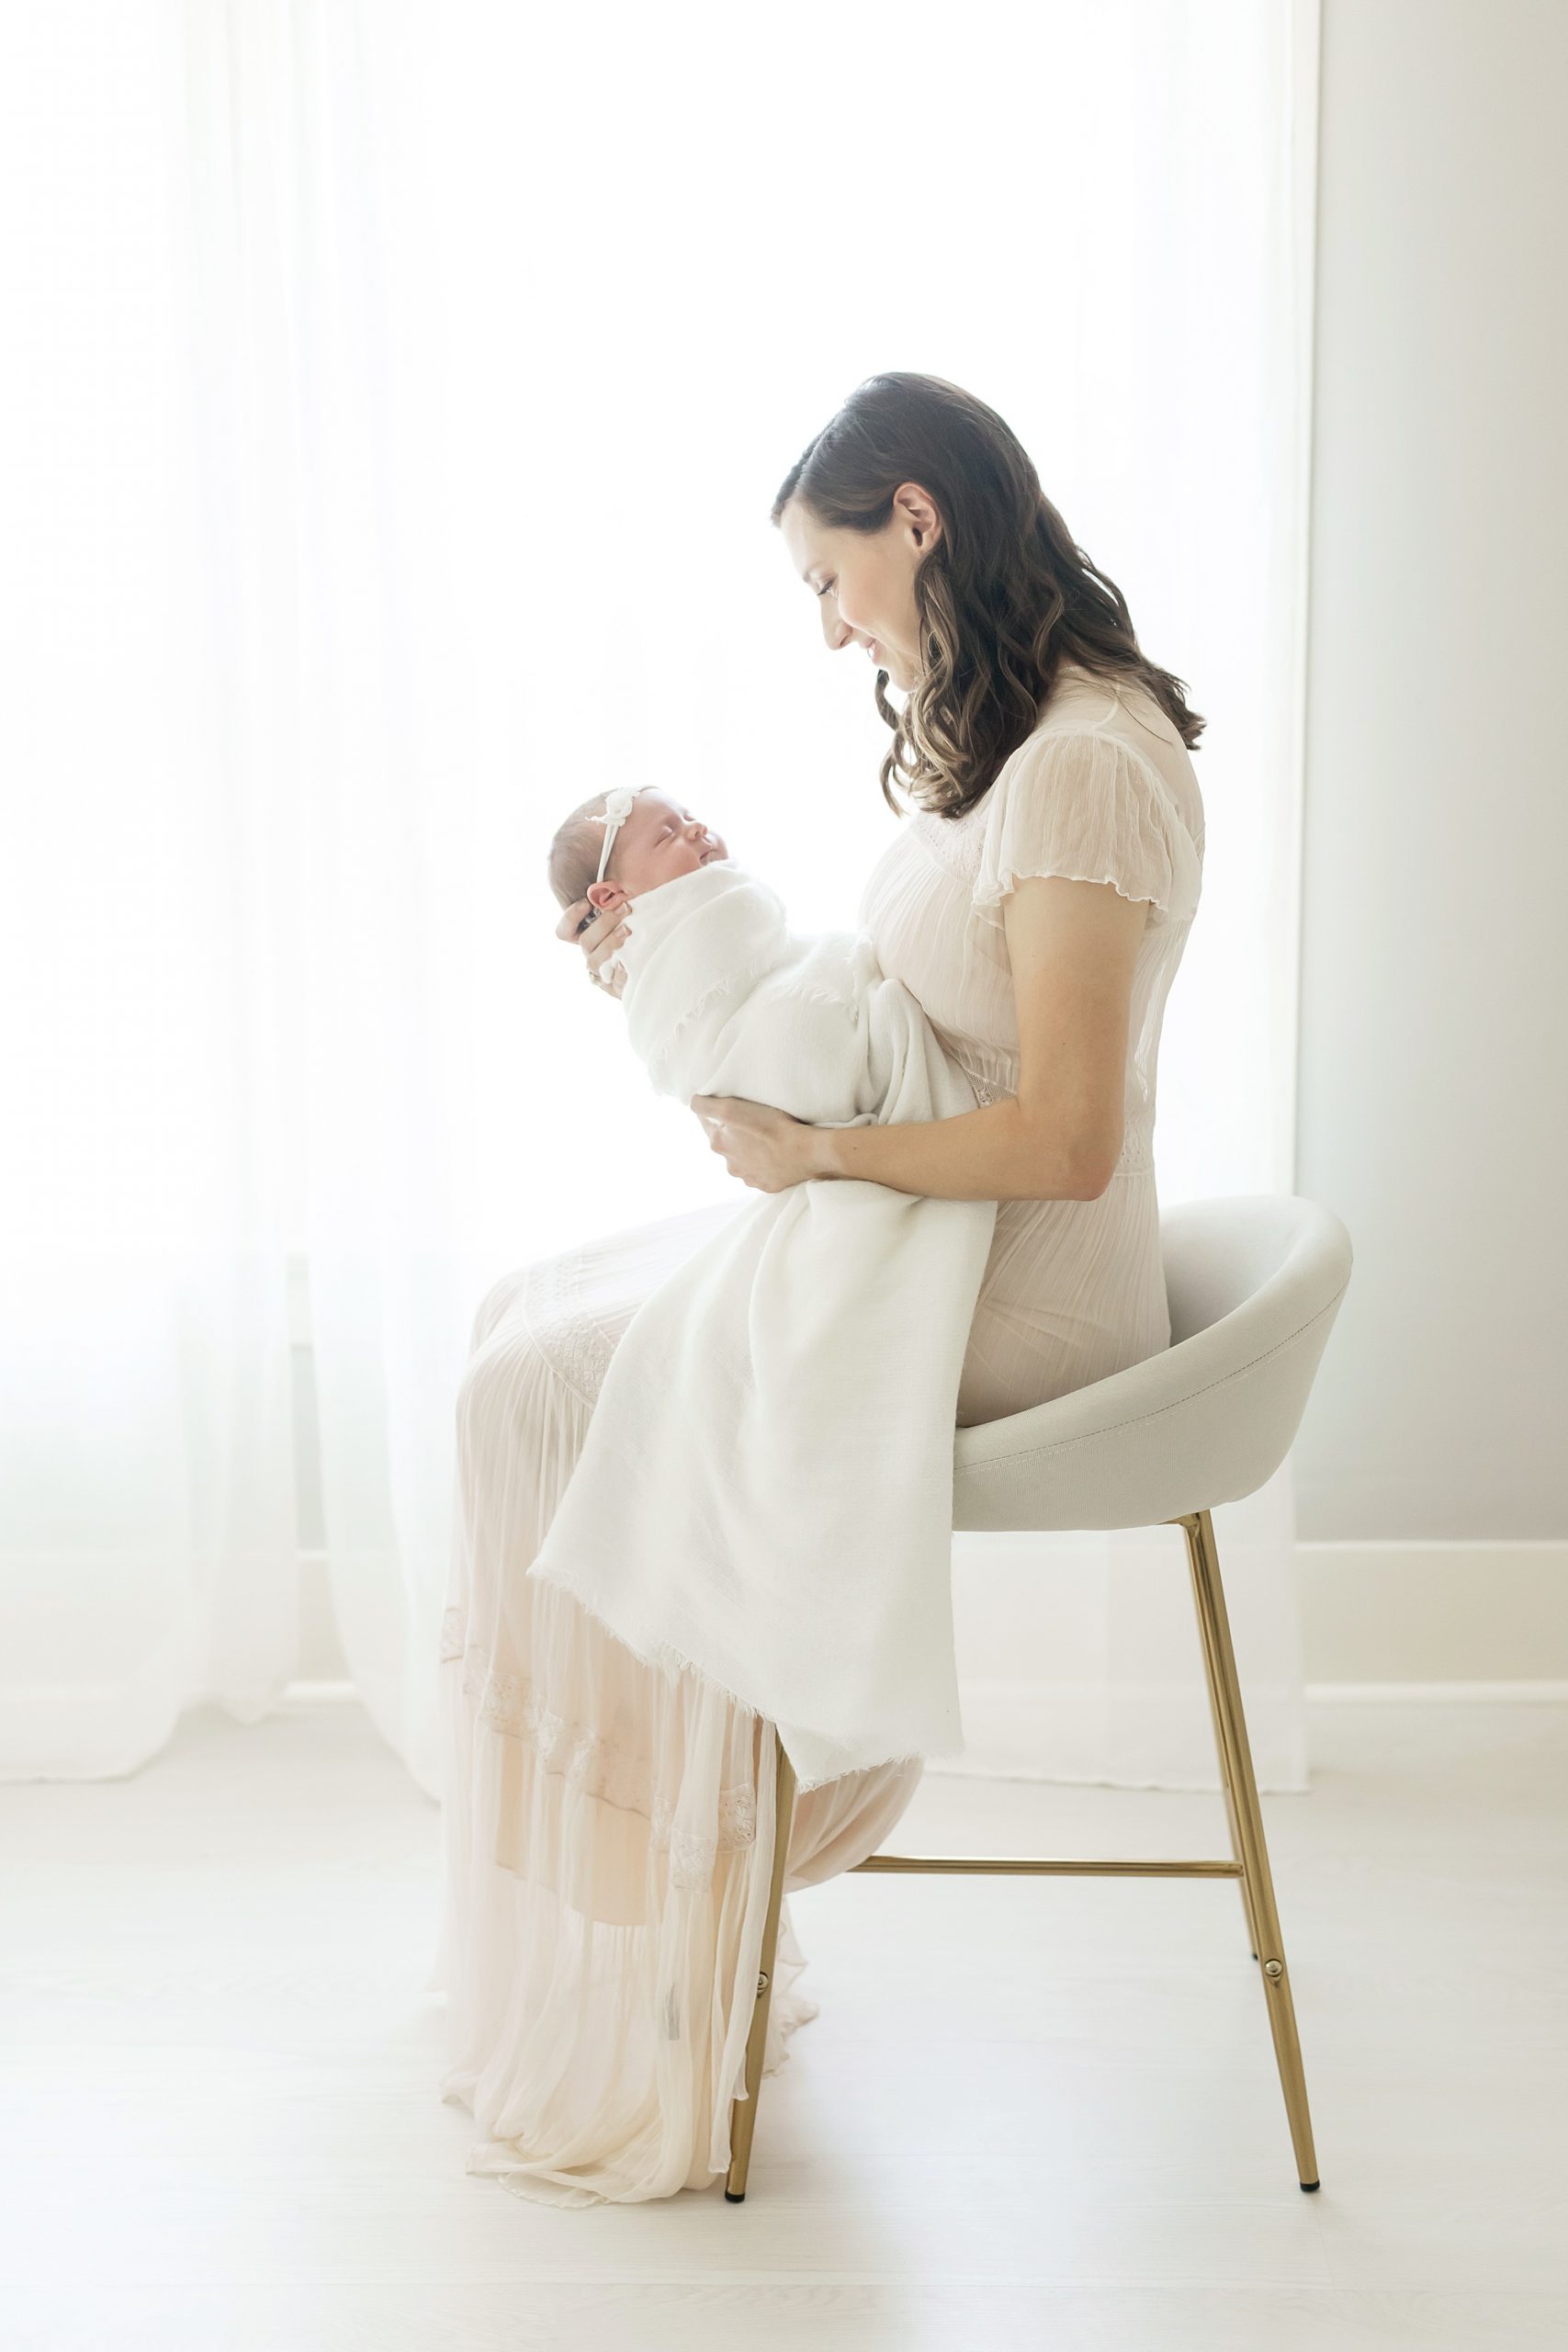 mom sitting on gold stool looking at newborn baby girl